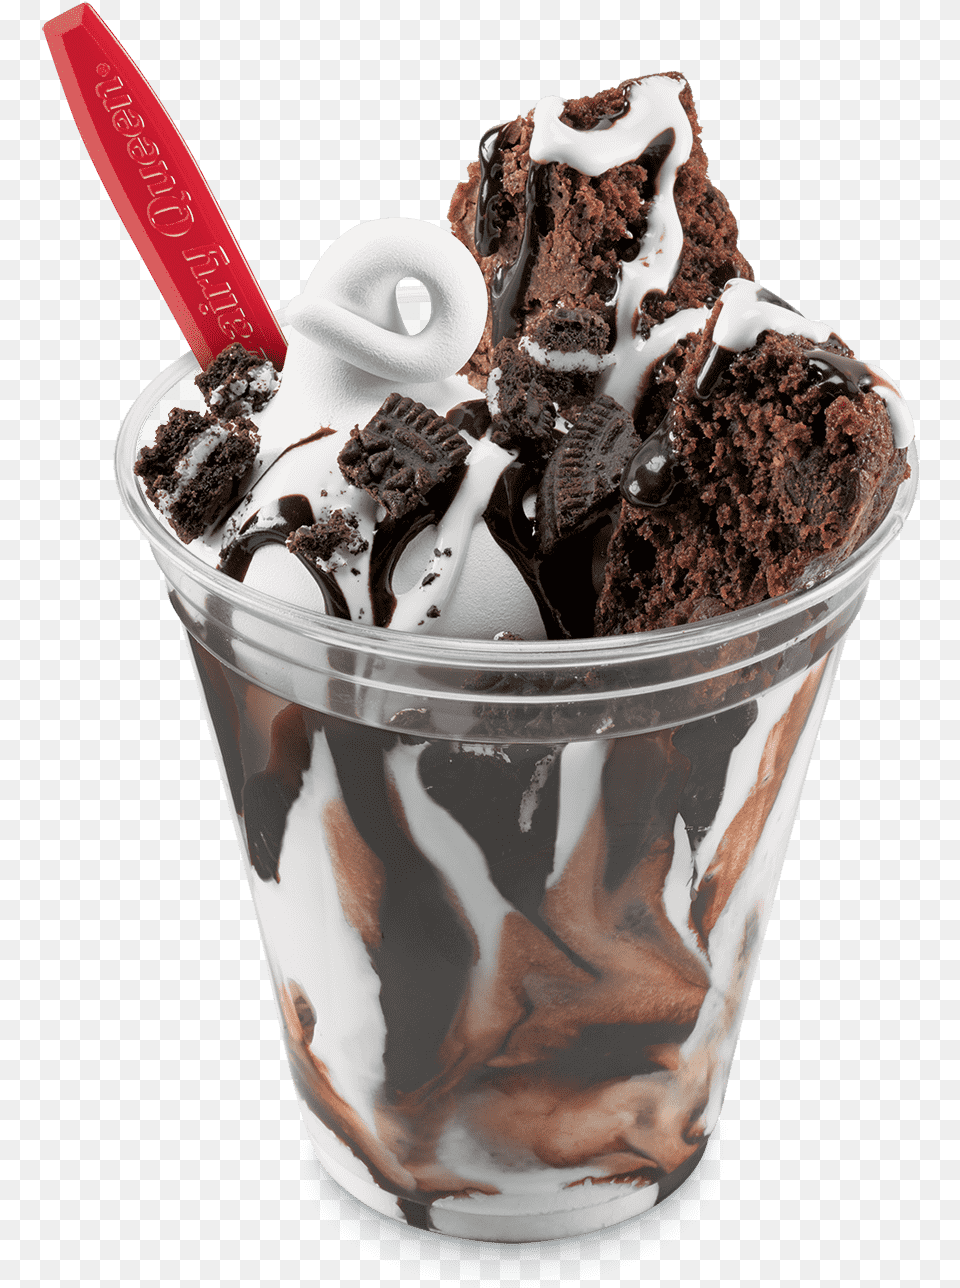 Brownie And Oreo Cupfection Dairy Queen Menu Dairy Queen Brownie Cupfection, Cream, Dessert, Food, Ice Cream Png